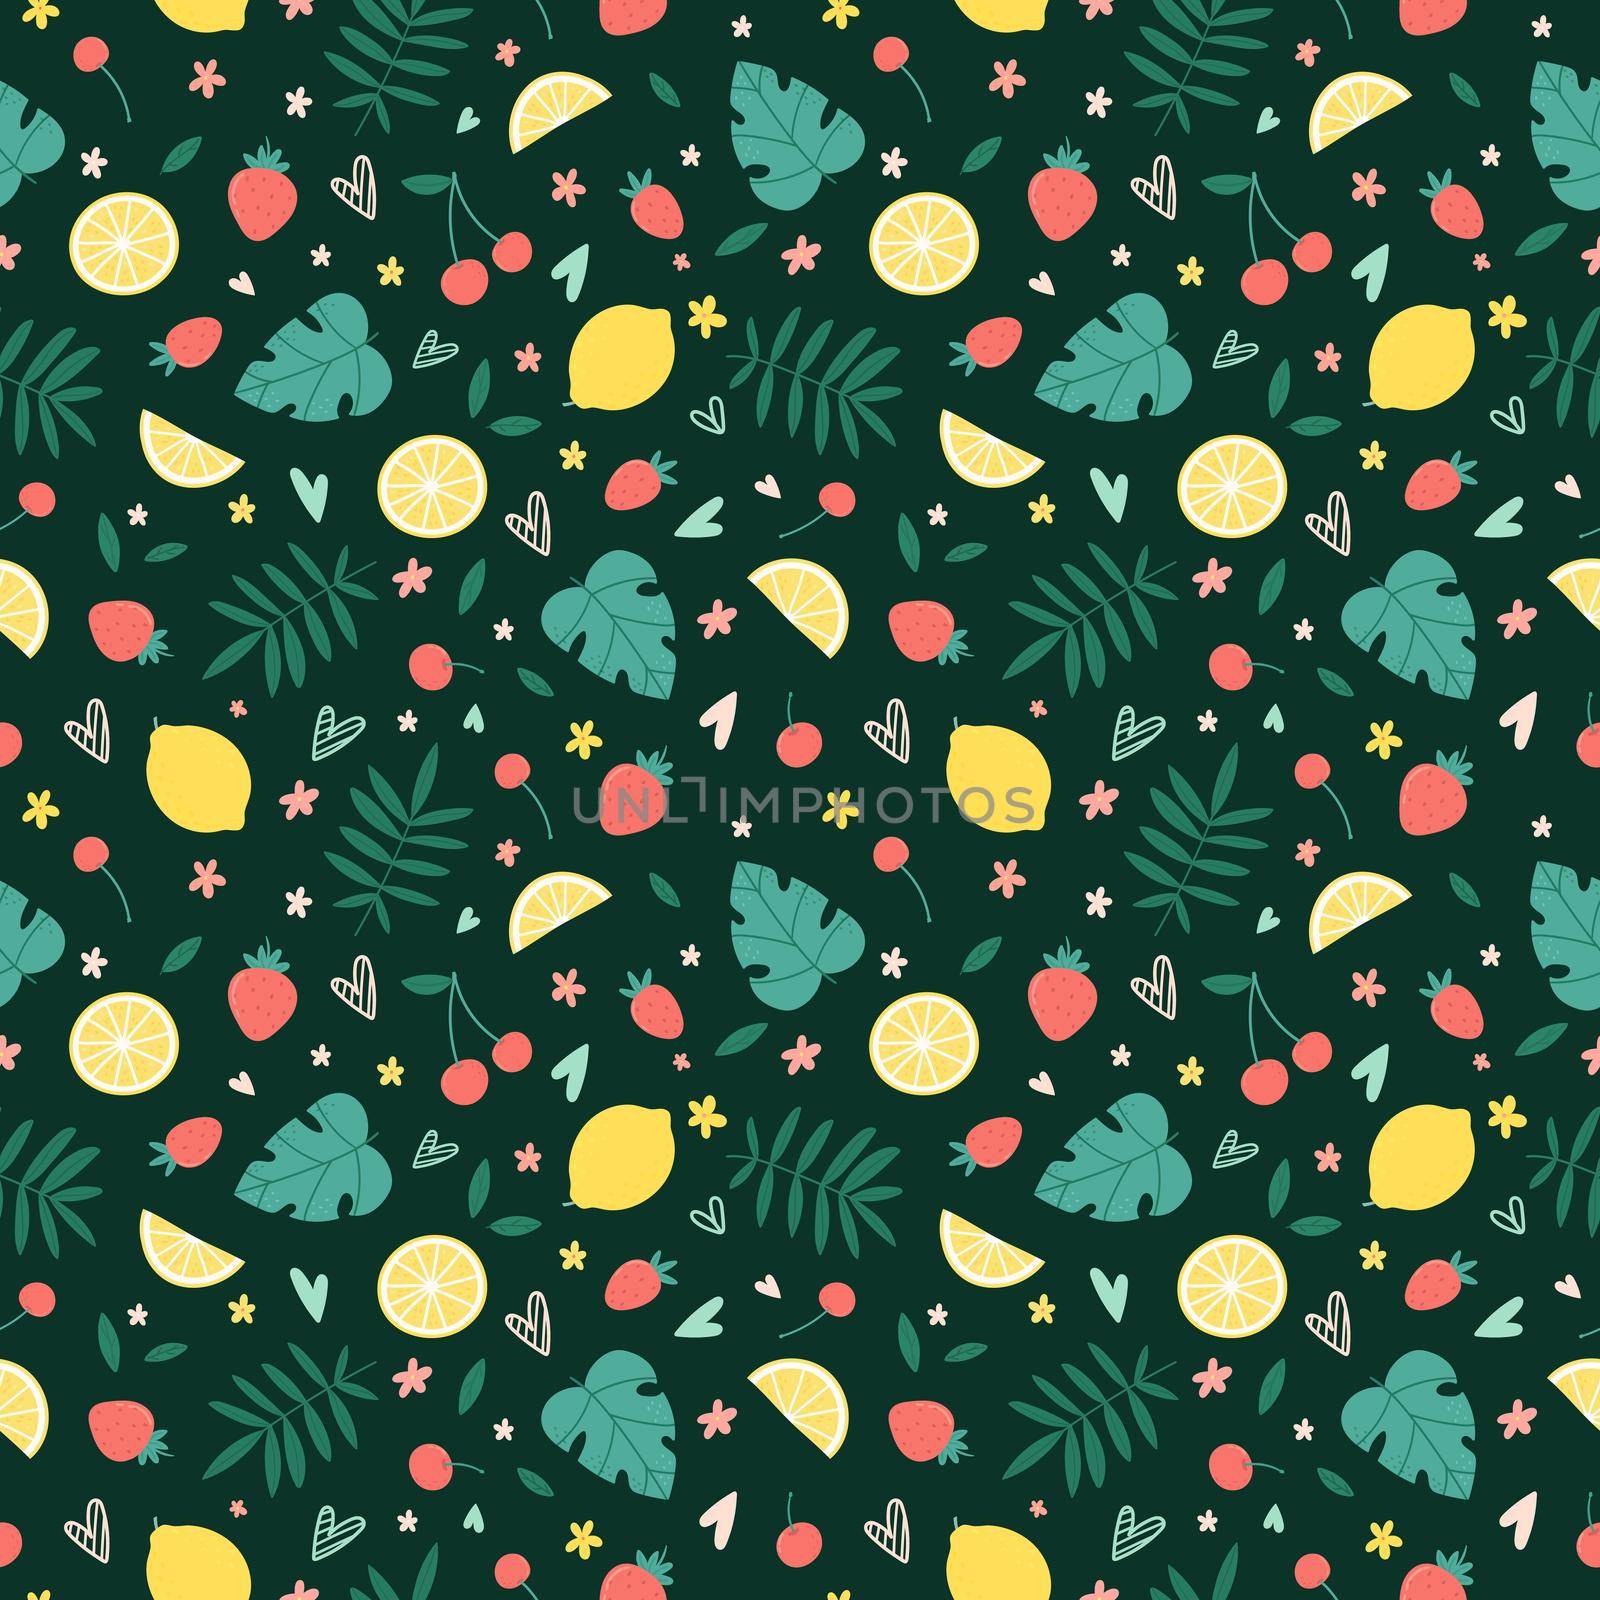 Seamless pattern with summer fruits, flowers and tropical leaves on a dark green background. by Lena_Khmelniuk